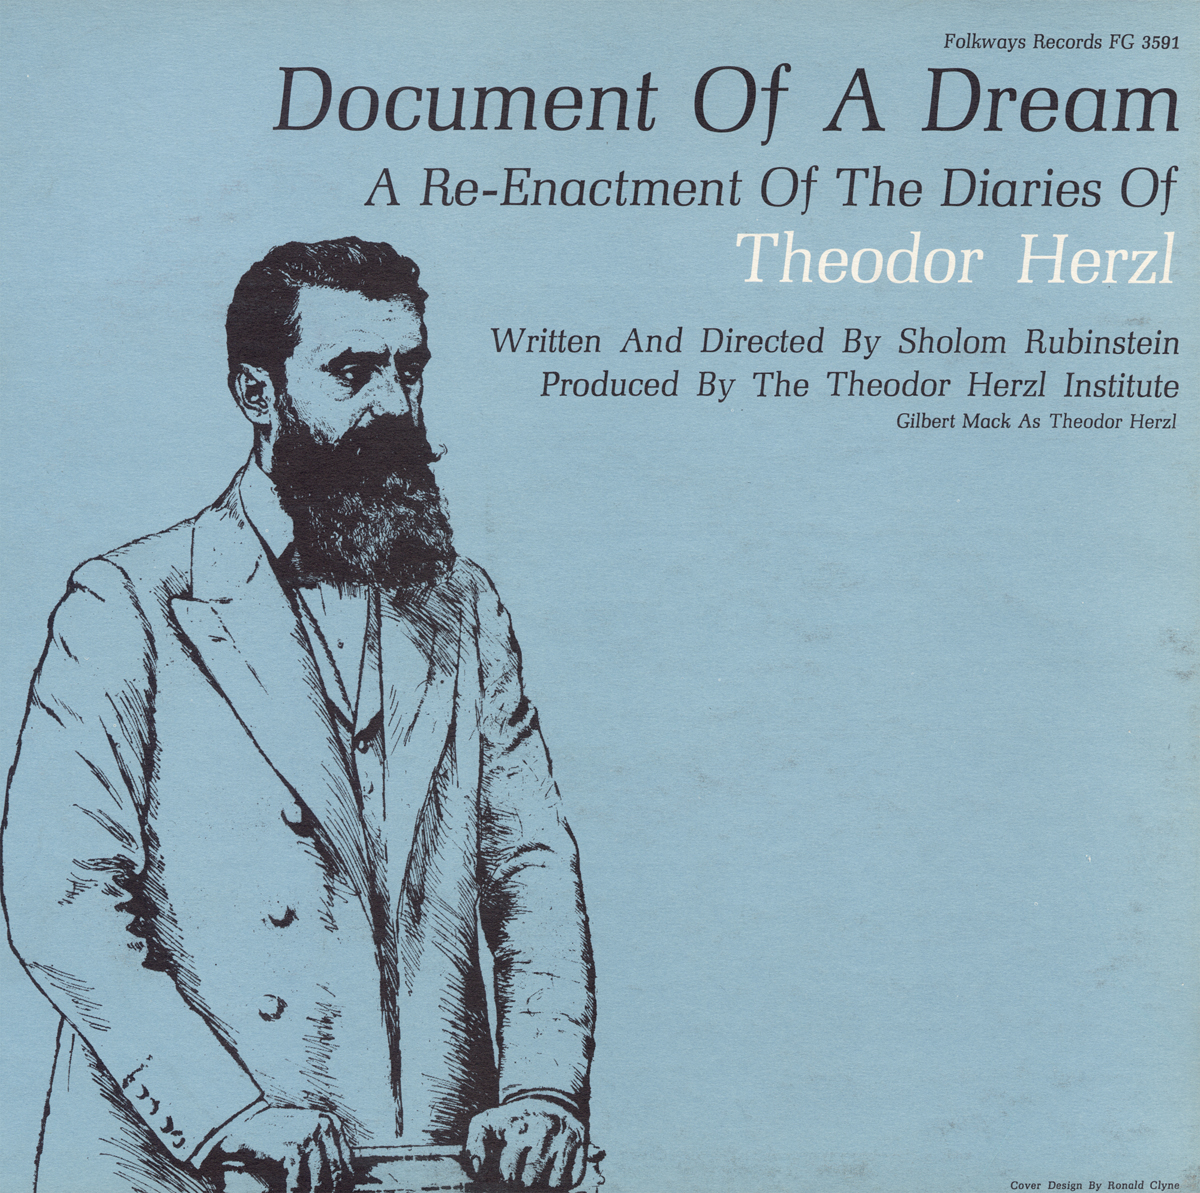 DOCUMENT OF A DREAM